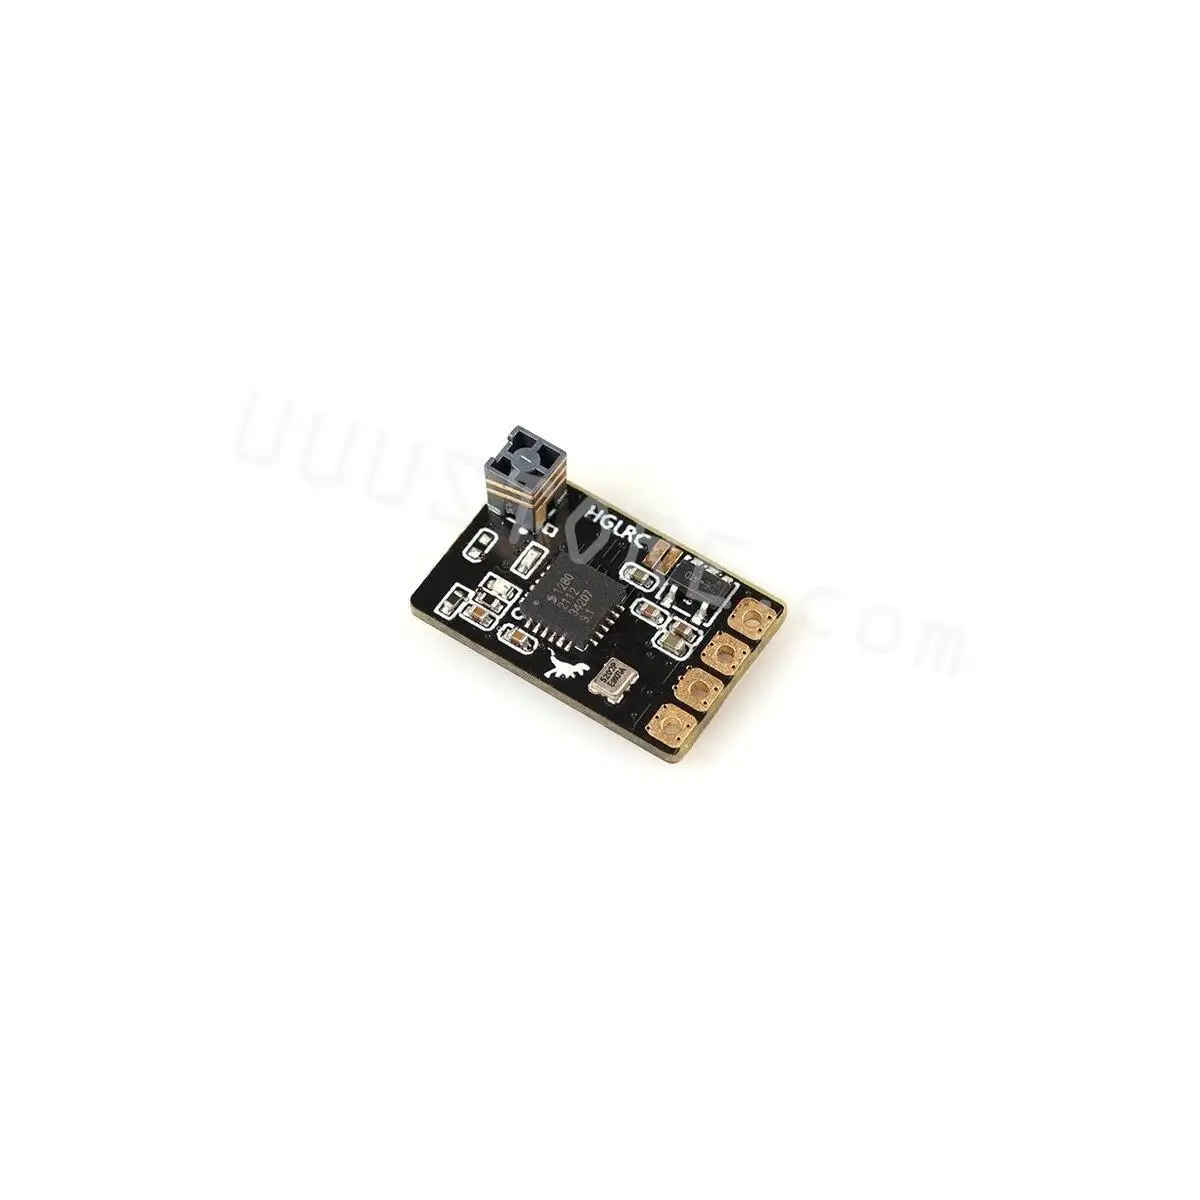 0.7g HGLRC Herme ExpressLRS ELRS 2.4GHz 2400RX-S 500Hz High Refresh Low Latency Mini Receiver for RC Cinewhoop Racing Drone Part 5